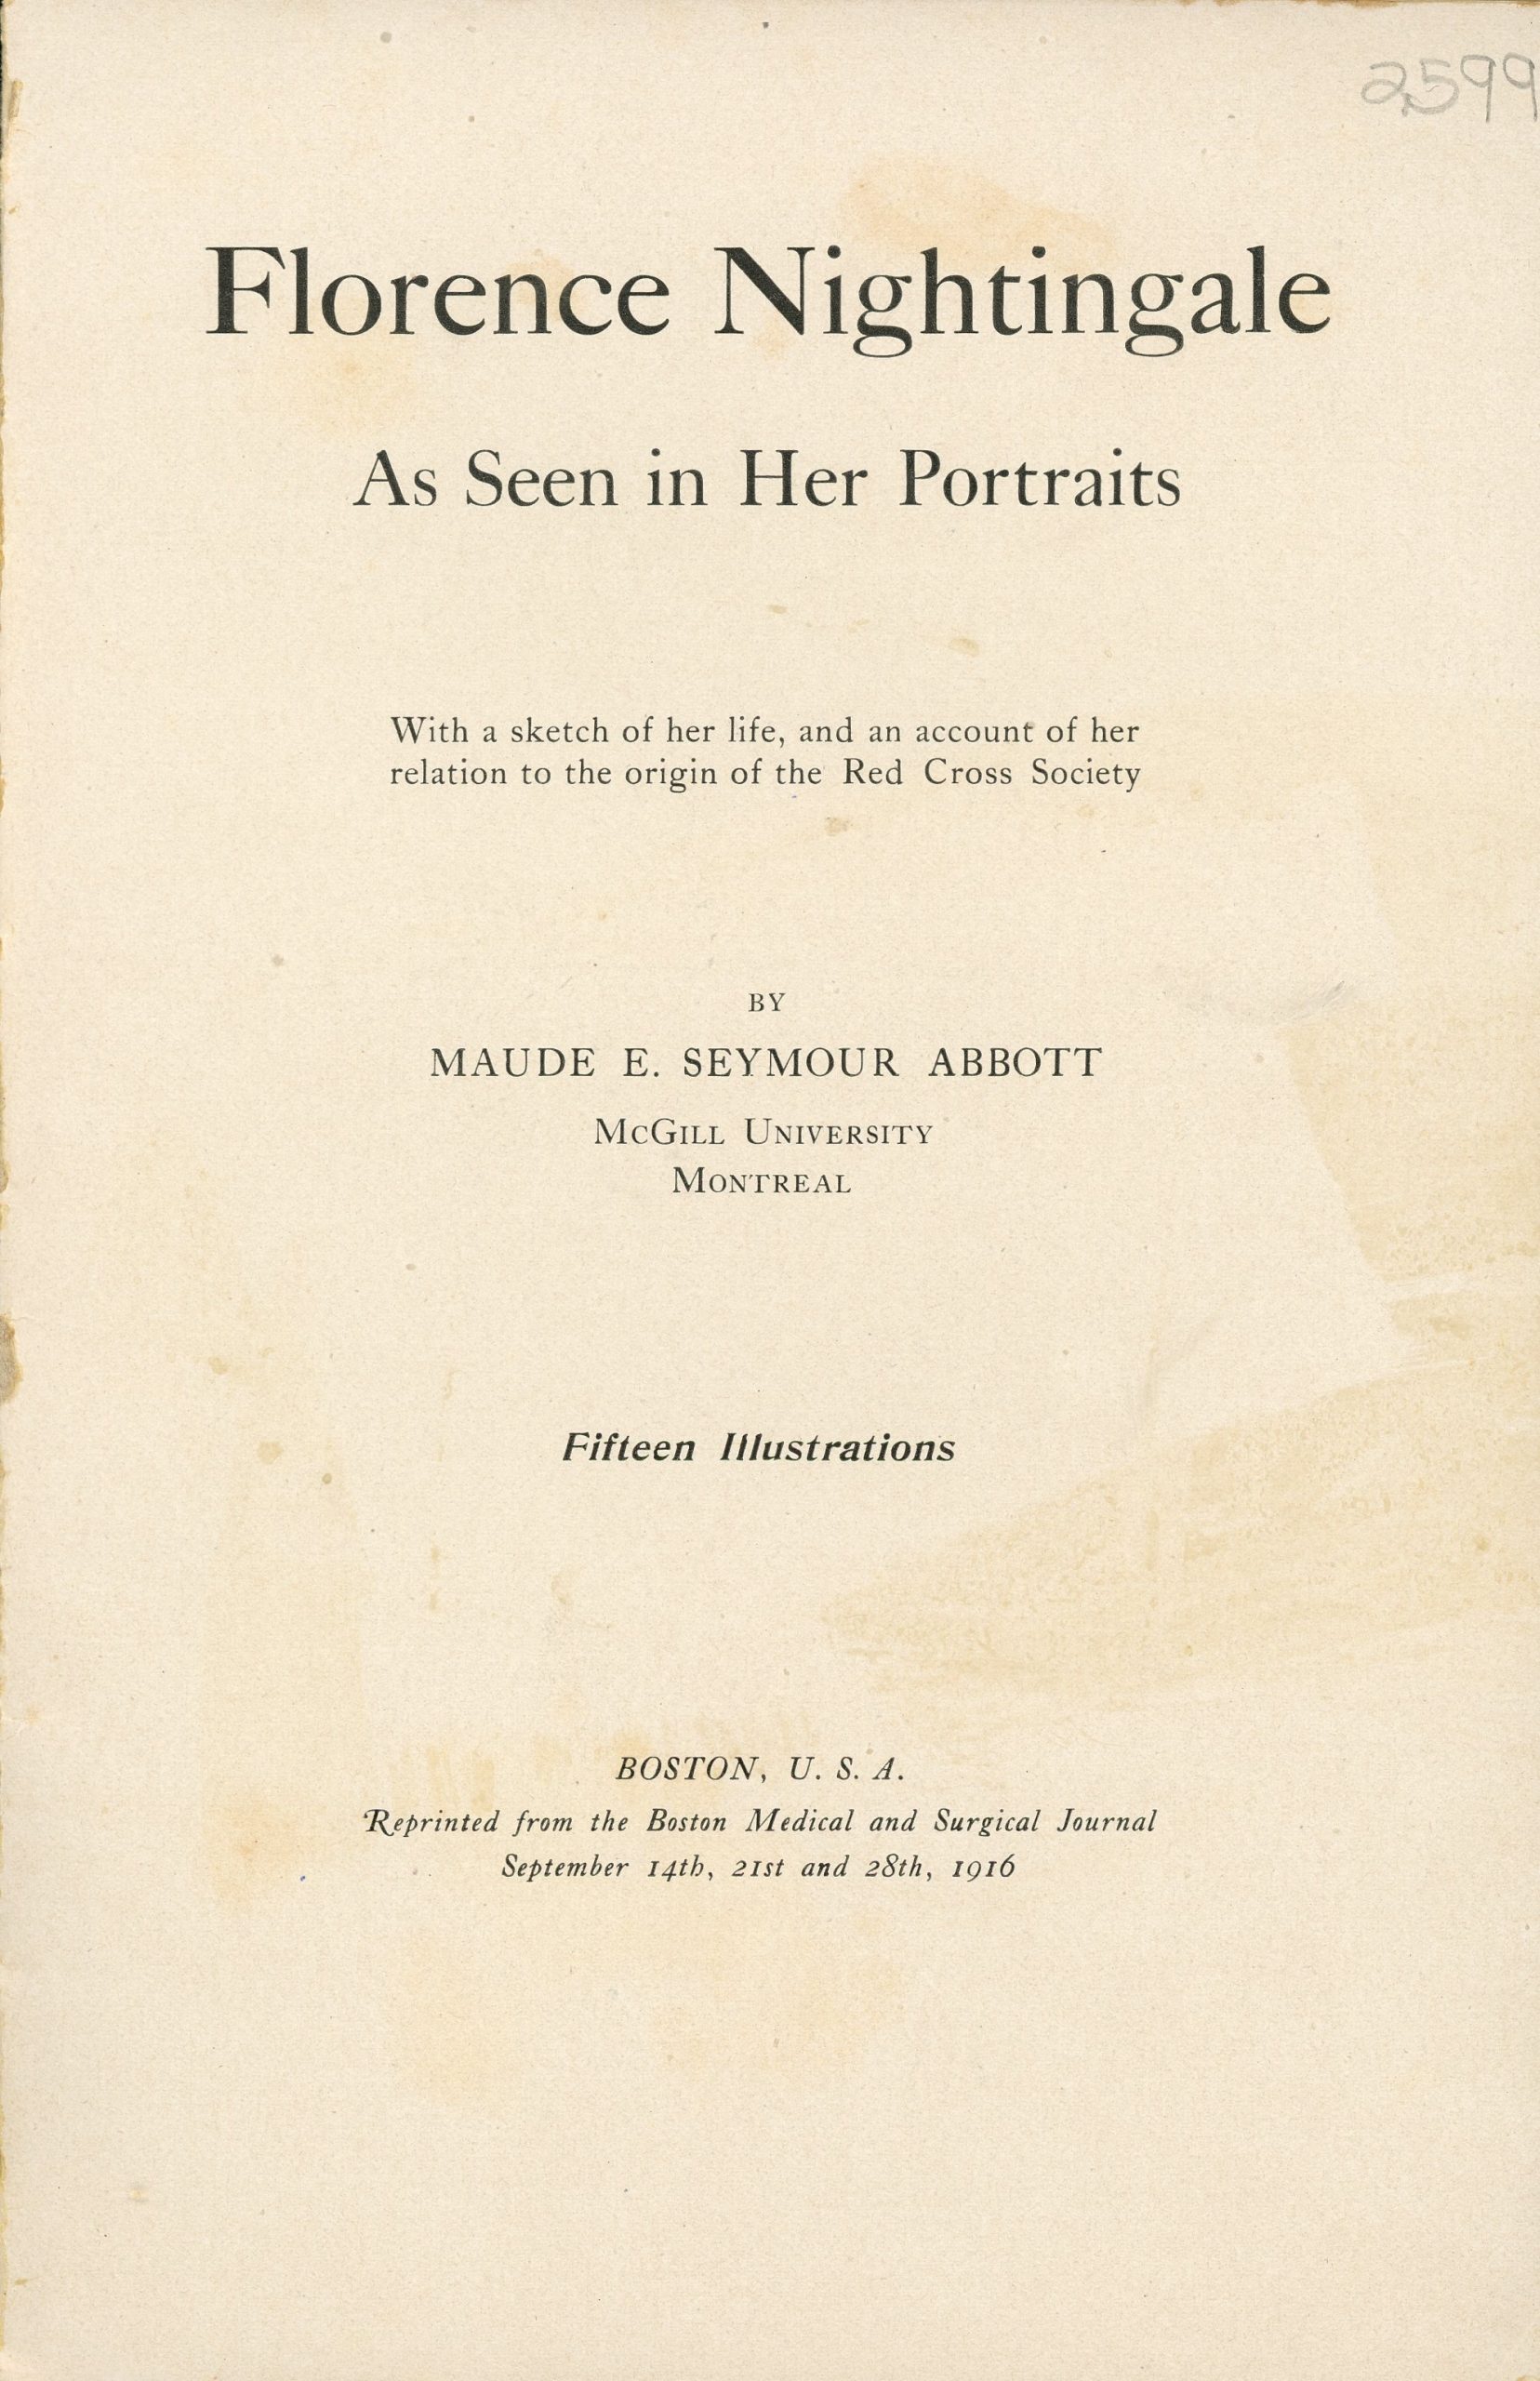 Page couverture du livre « Florence Nightingale As Seen in Her Portraits With a sketch of her life, and an account of her relation to the origin of the Red Cross Society By MAUDE E. SEYMOUR ABBOTT McGill University Montreal Fifteen Illustrations BOSTON, U.S.A. Reprinted from the Boston Medical and Surgical Journal September 14th, 21st and 28th, 1916 ».